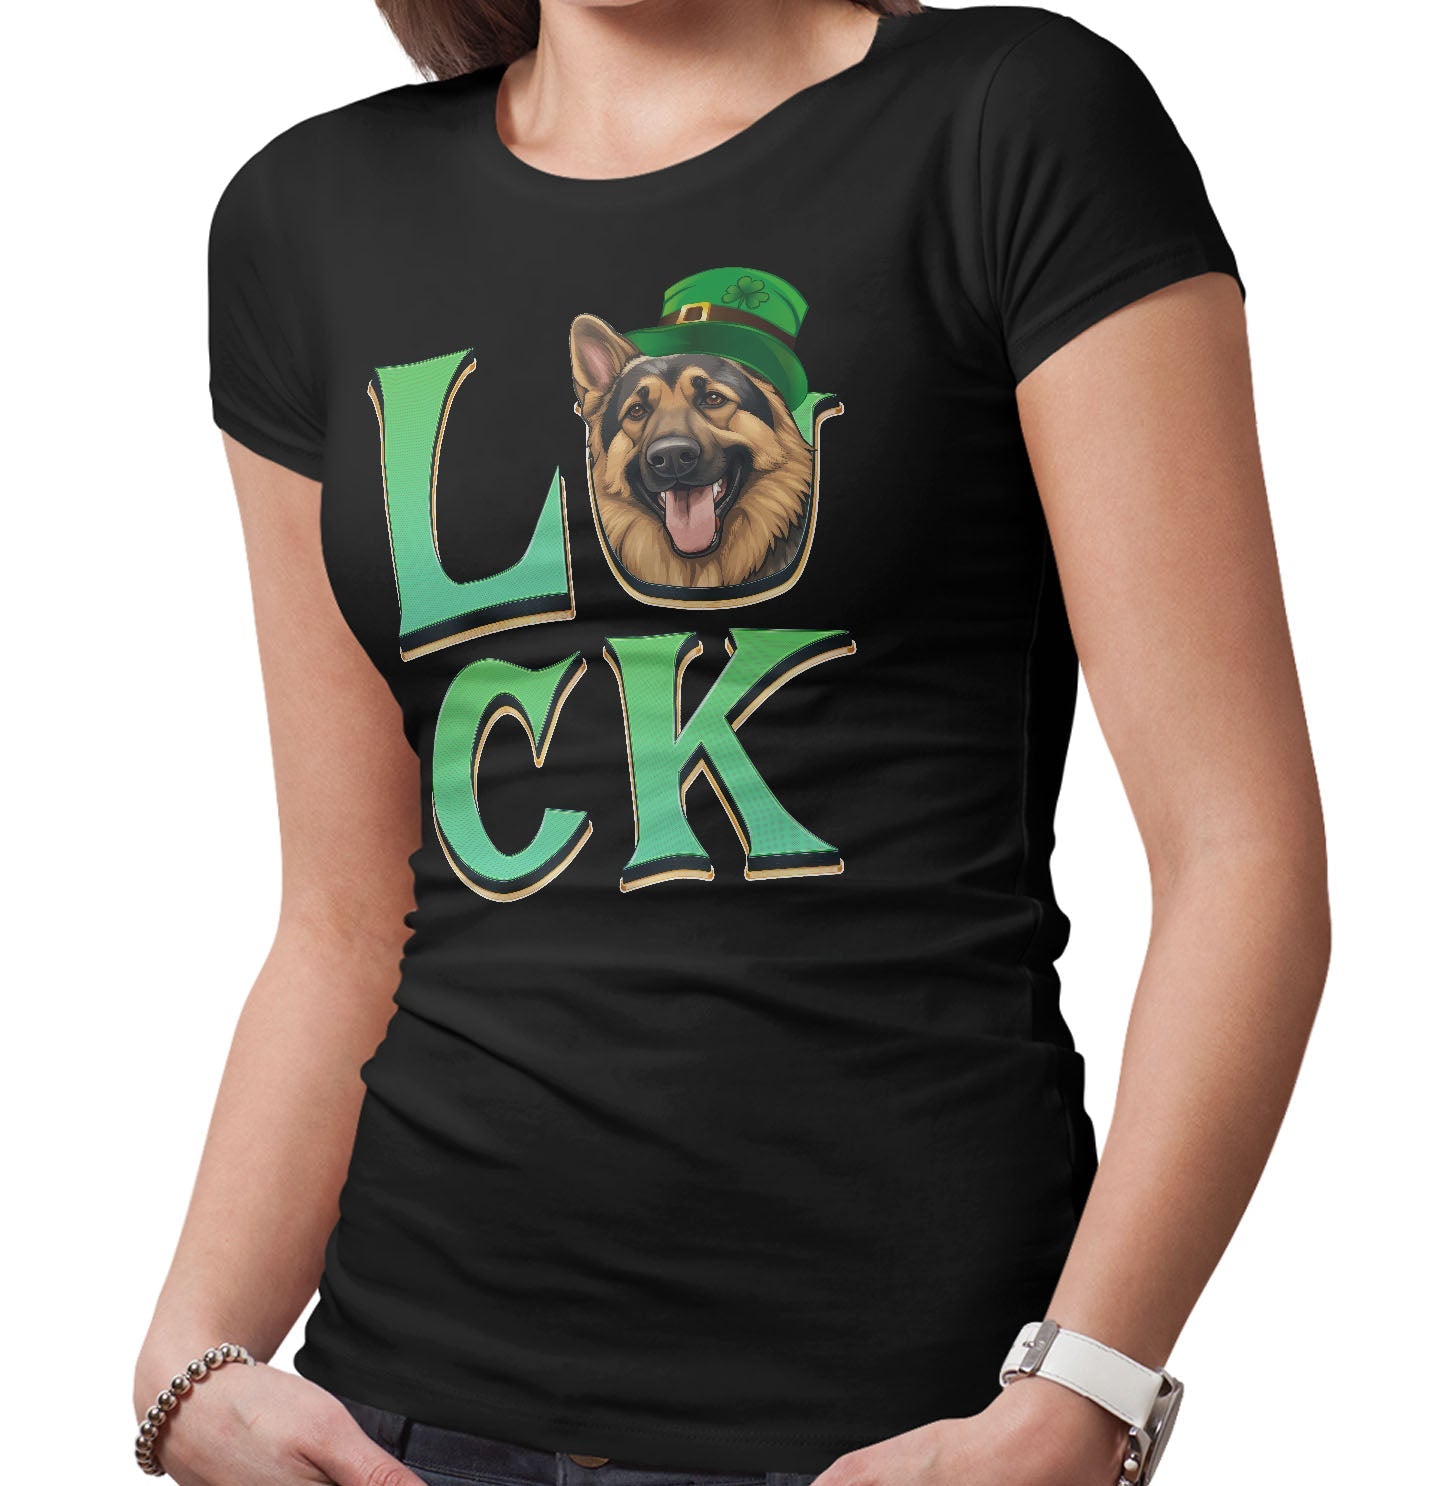 Big LUCK St. Patrick's Day German Shepherd Dog - Women's Fitted T-Shirt